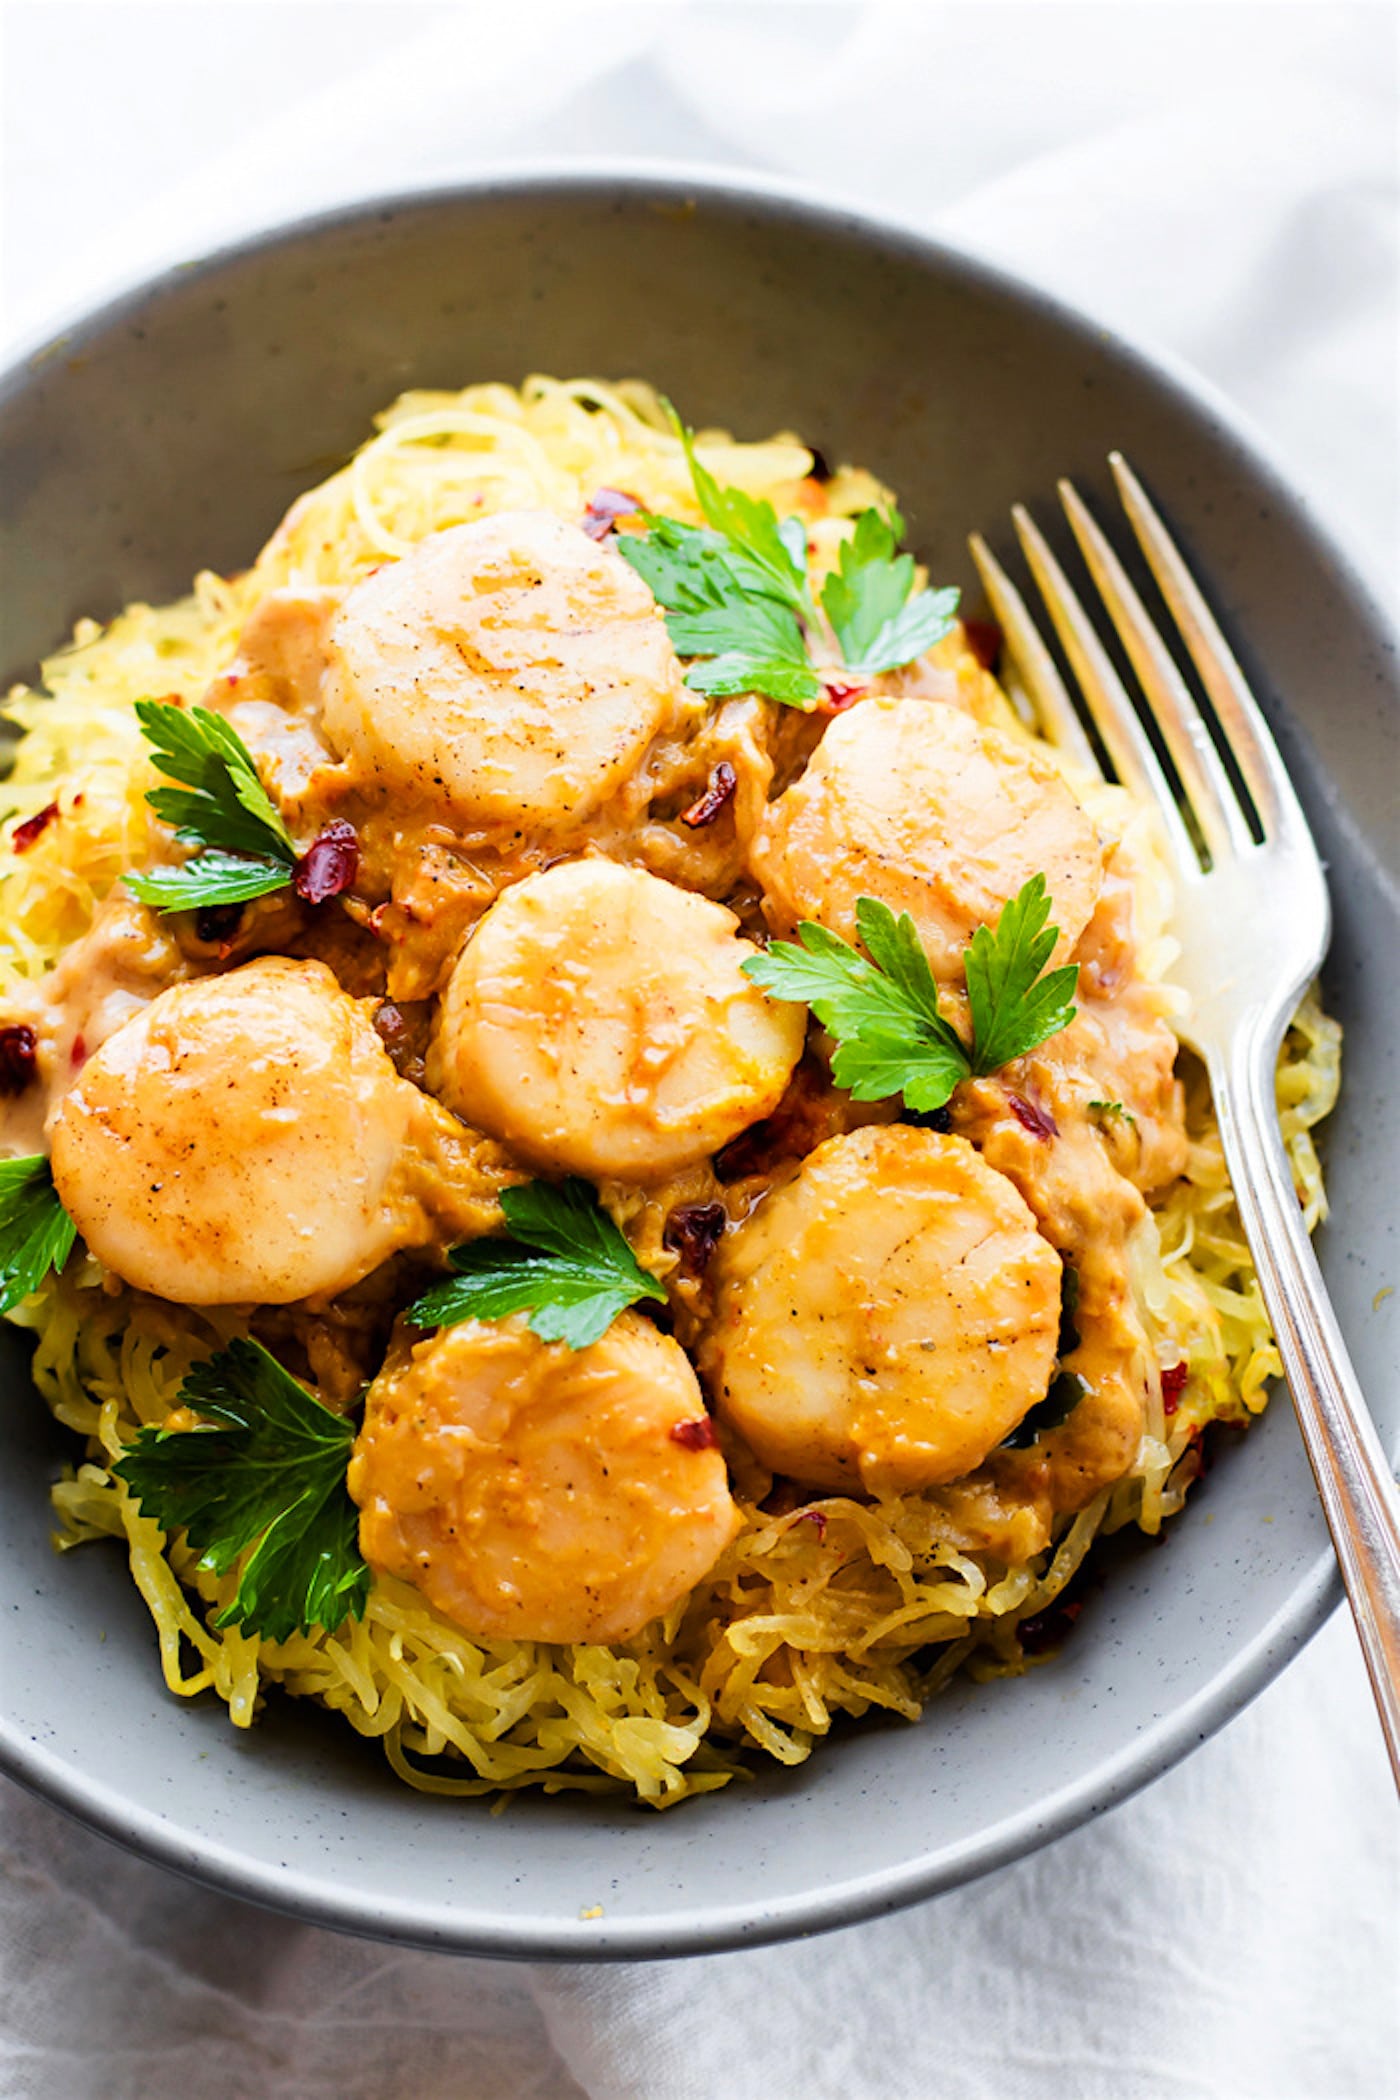 Miso pumpkin coasted scallops over a bed of spaghetti squash pasta served in a grey bowl and topped with fresh herbs.